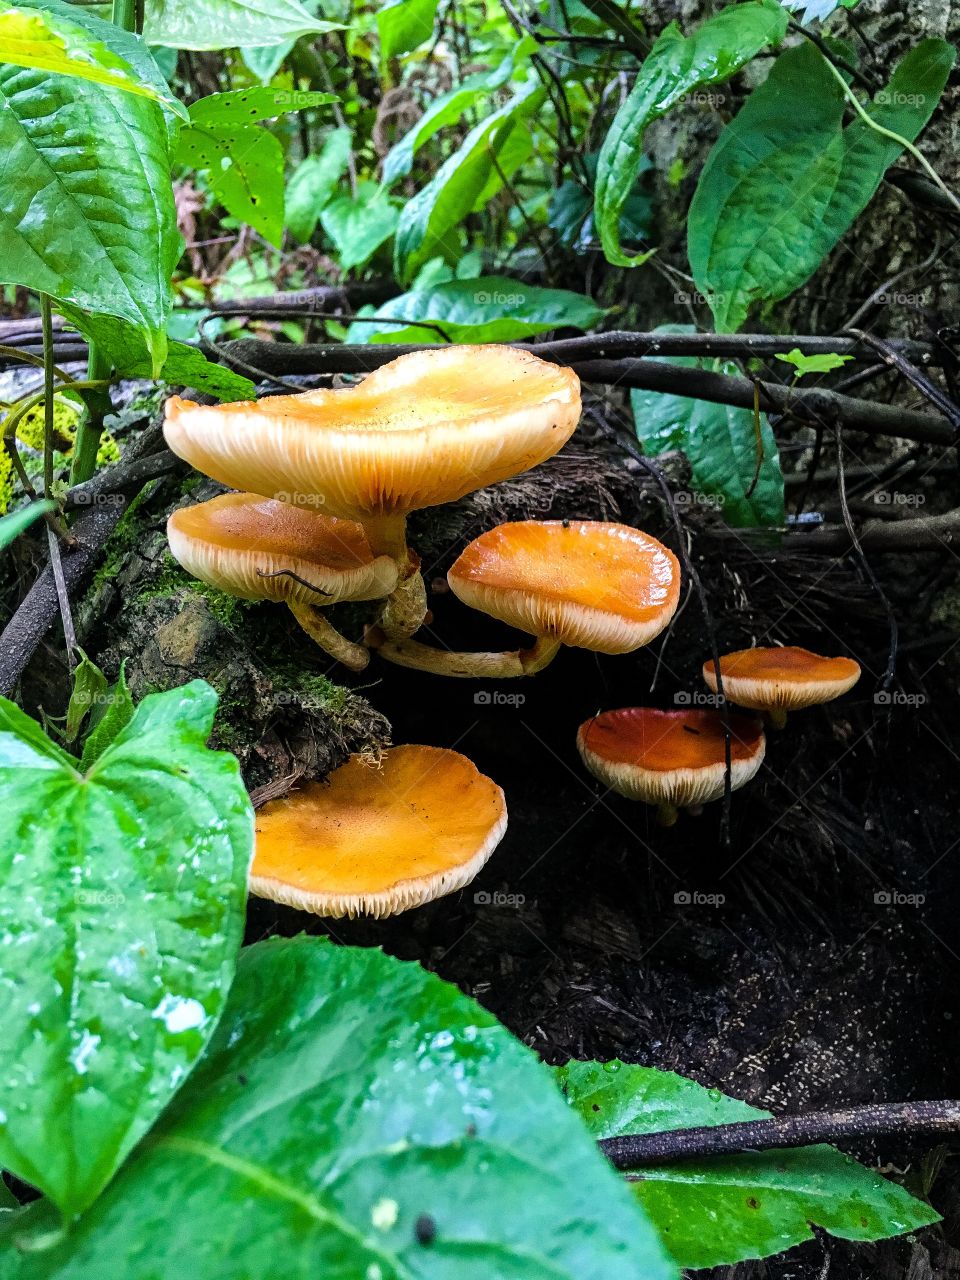 Mushrooms in South Florida forest 